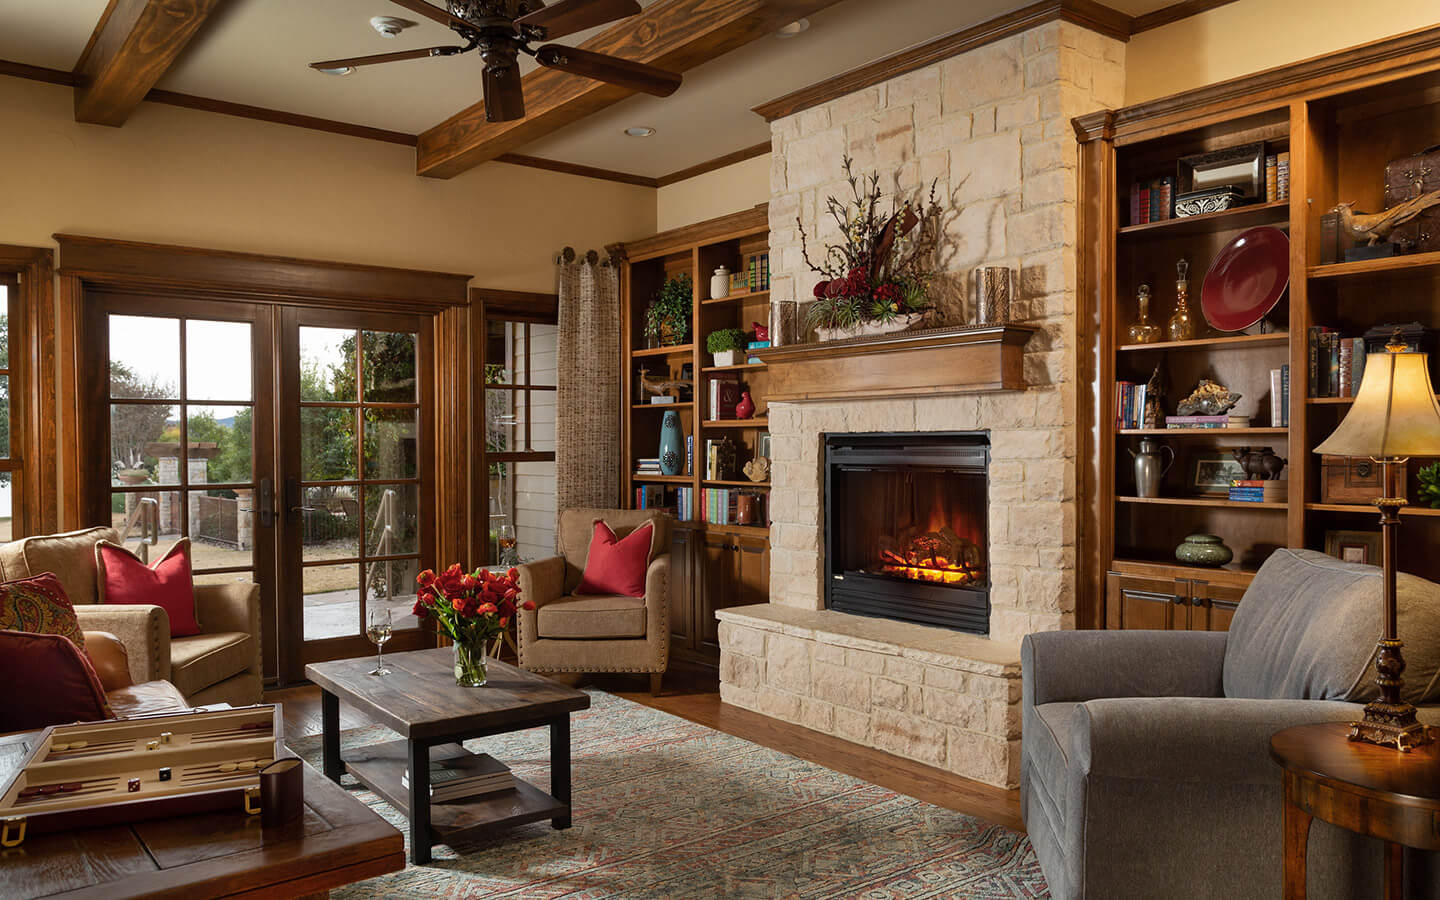 Granbury, TX Inn rooms with fireplaces